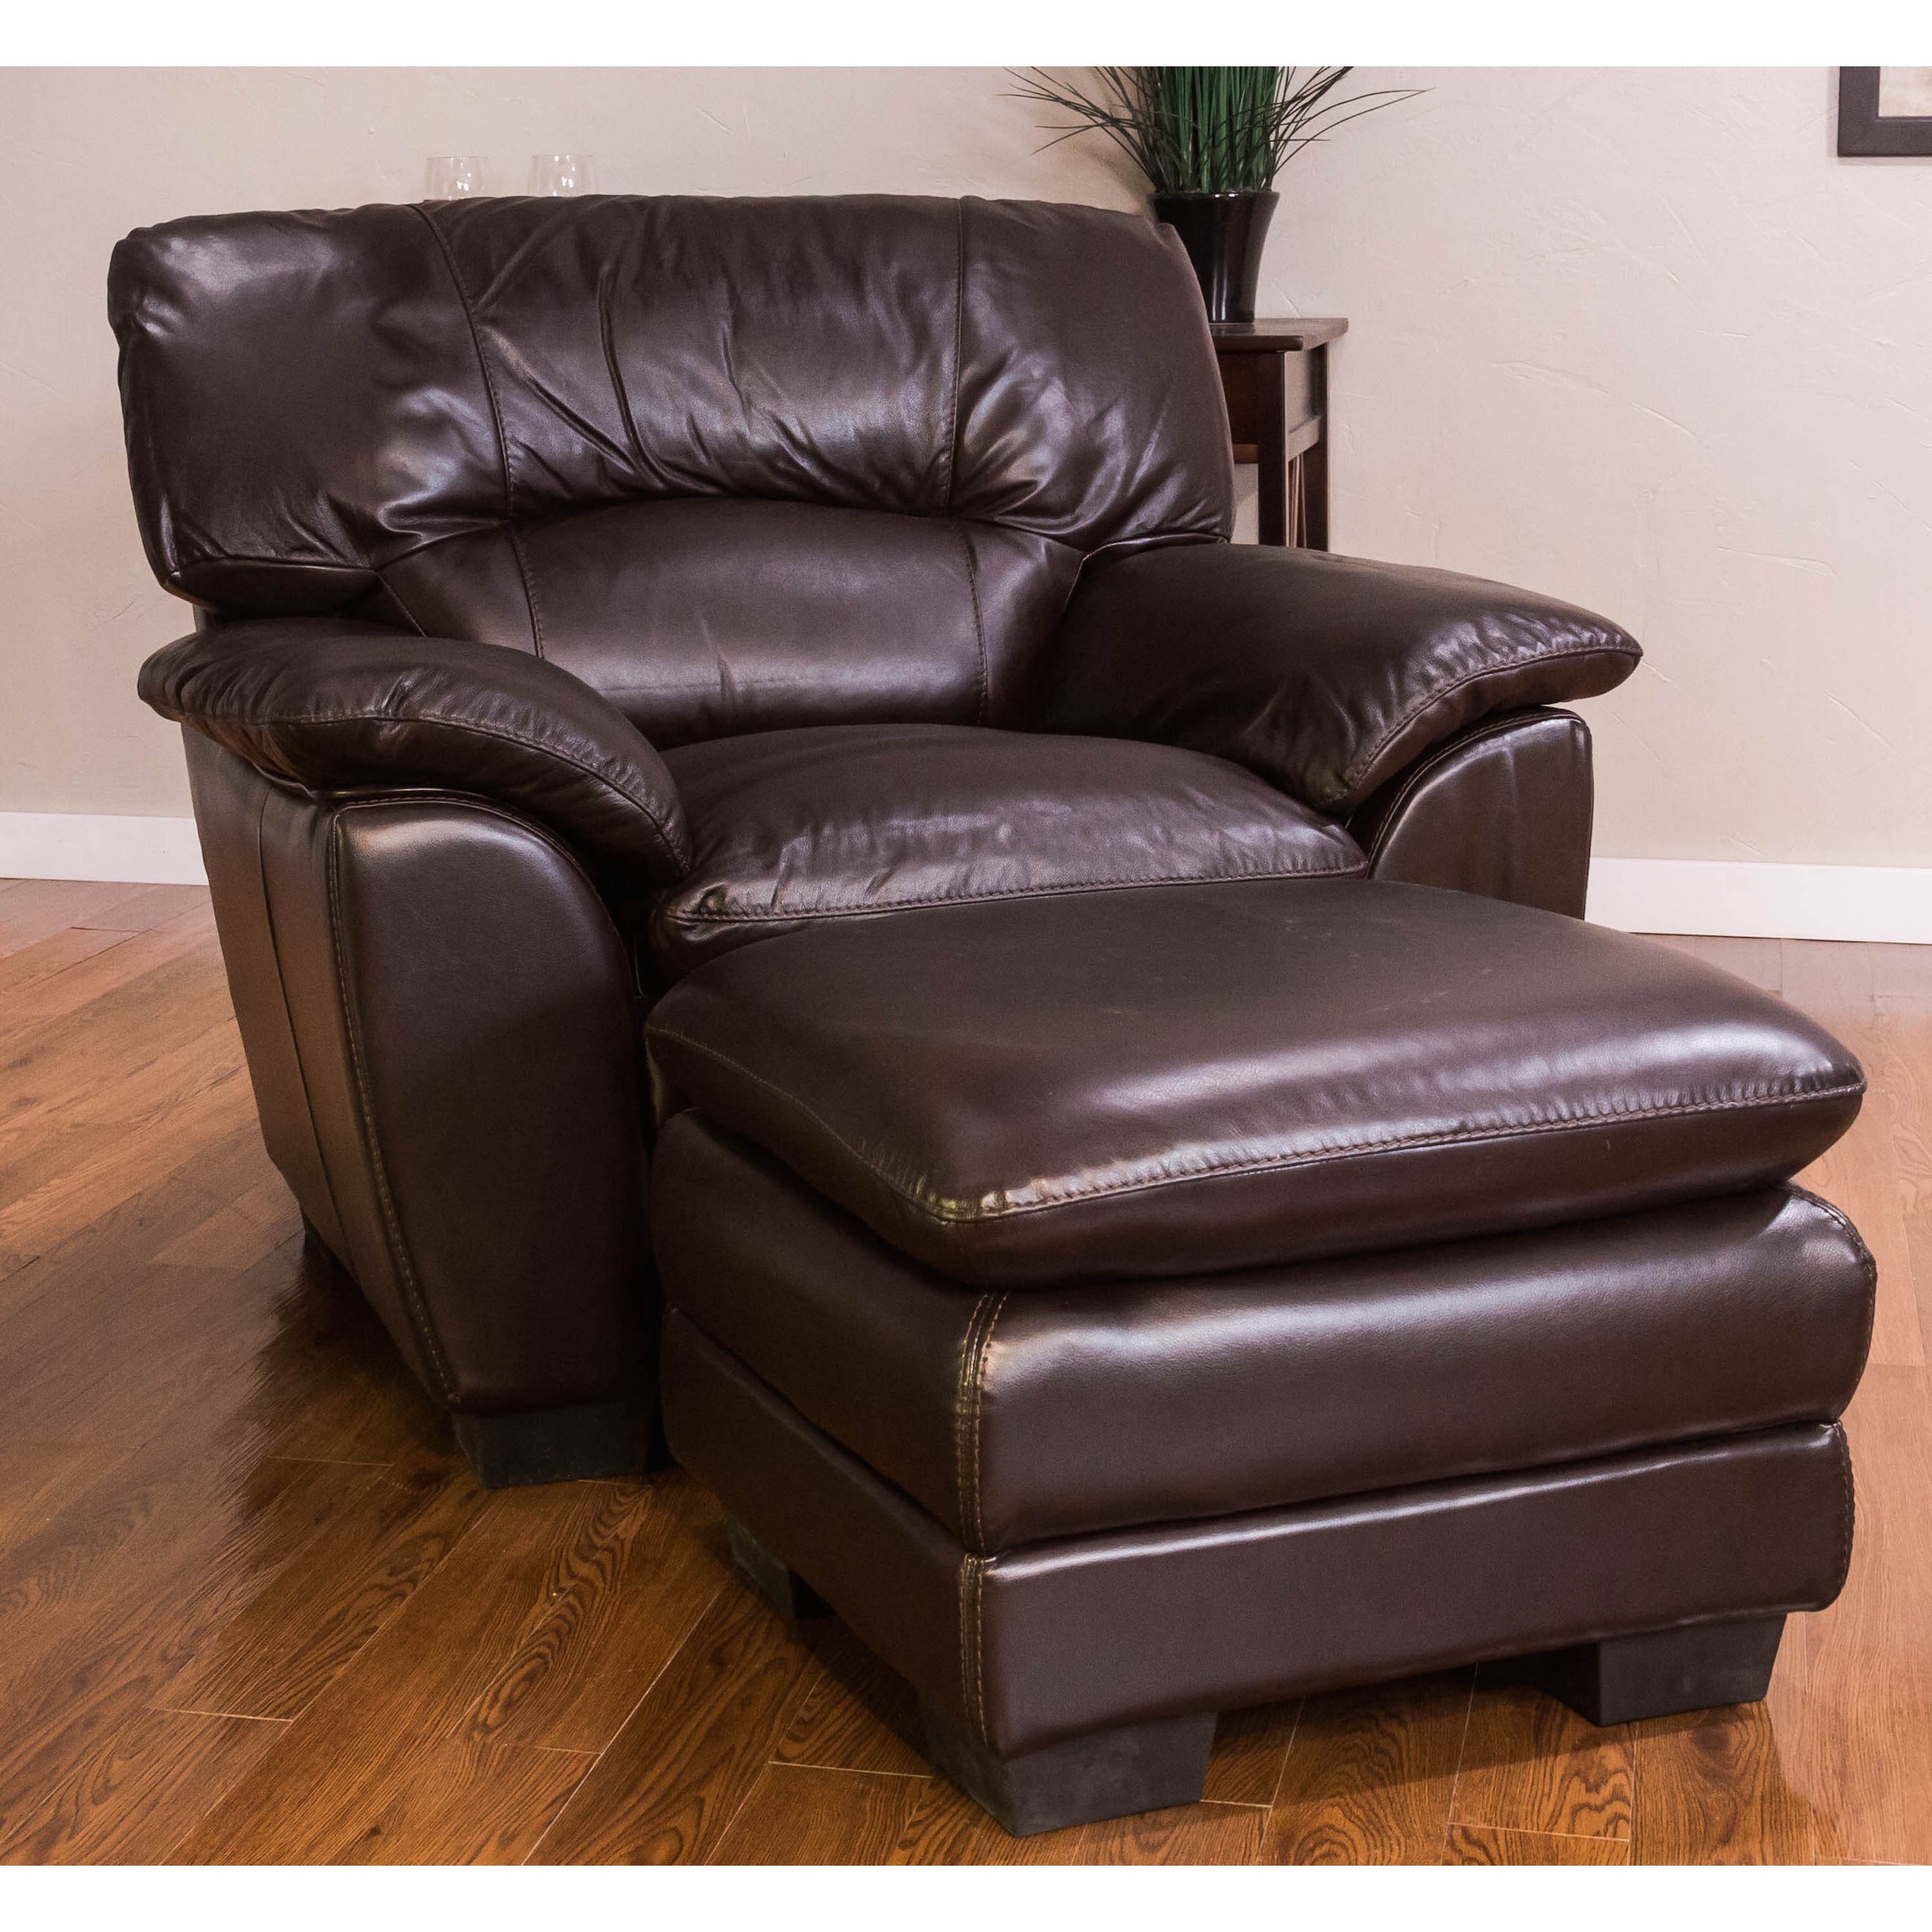 Oversized Leather Chair With Ottoman Fielding Oversized